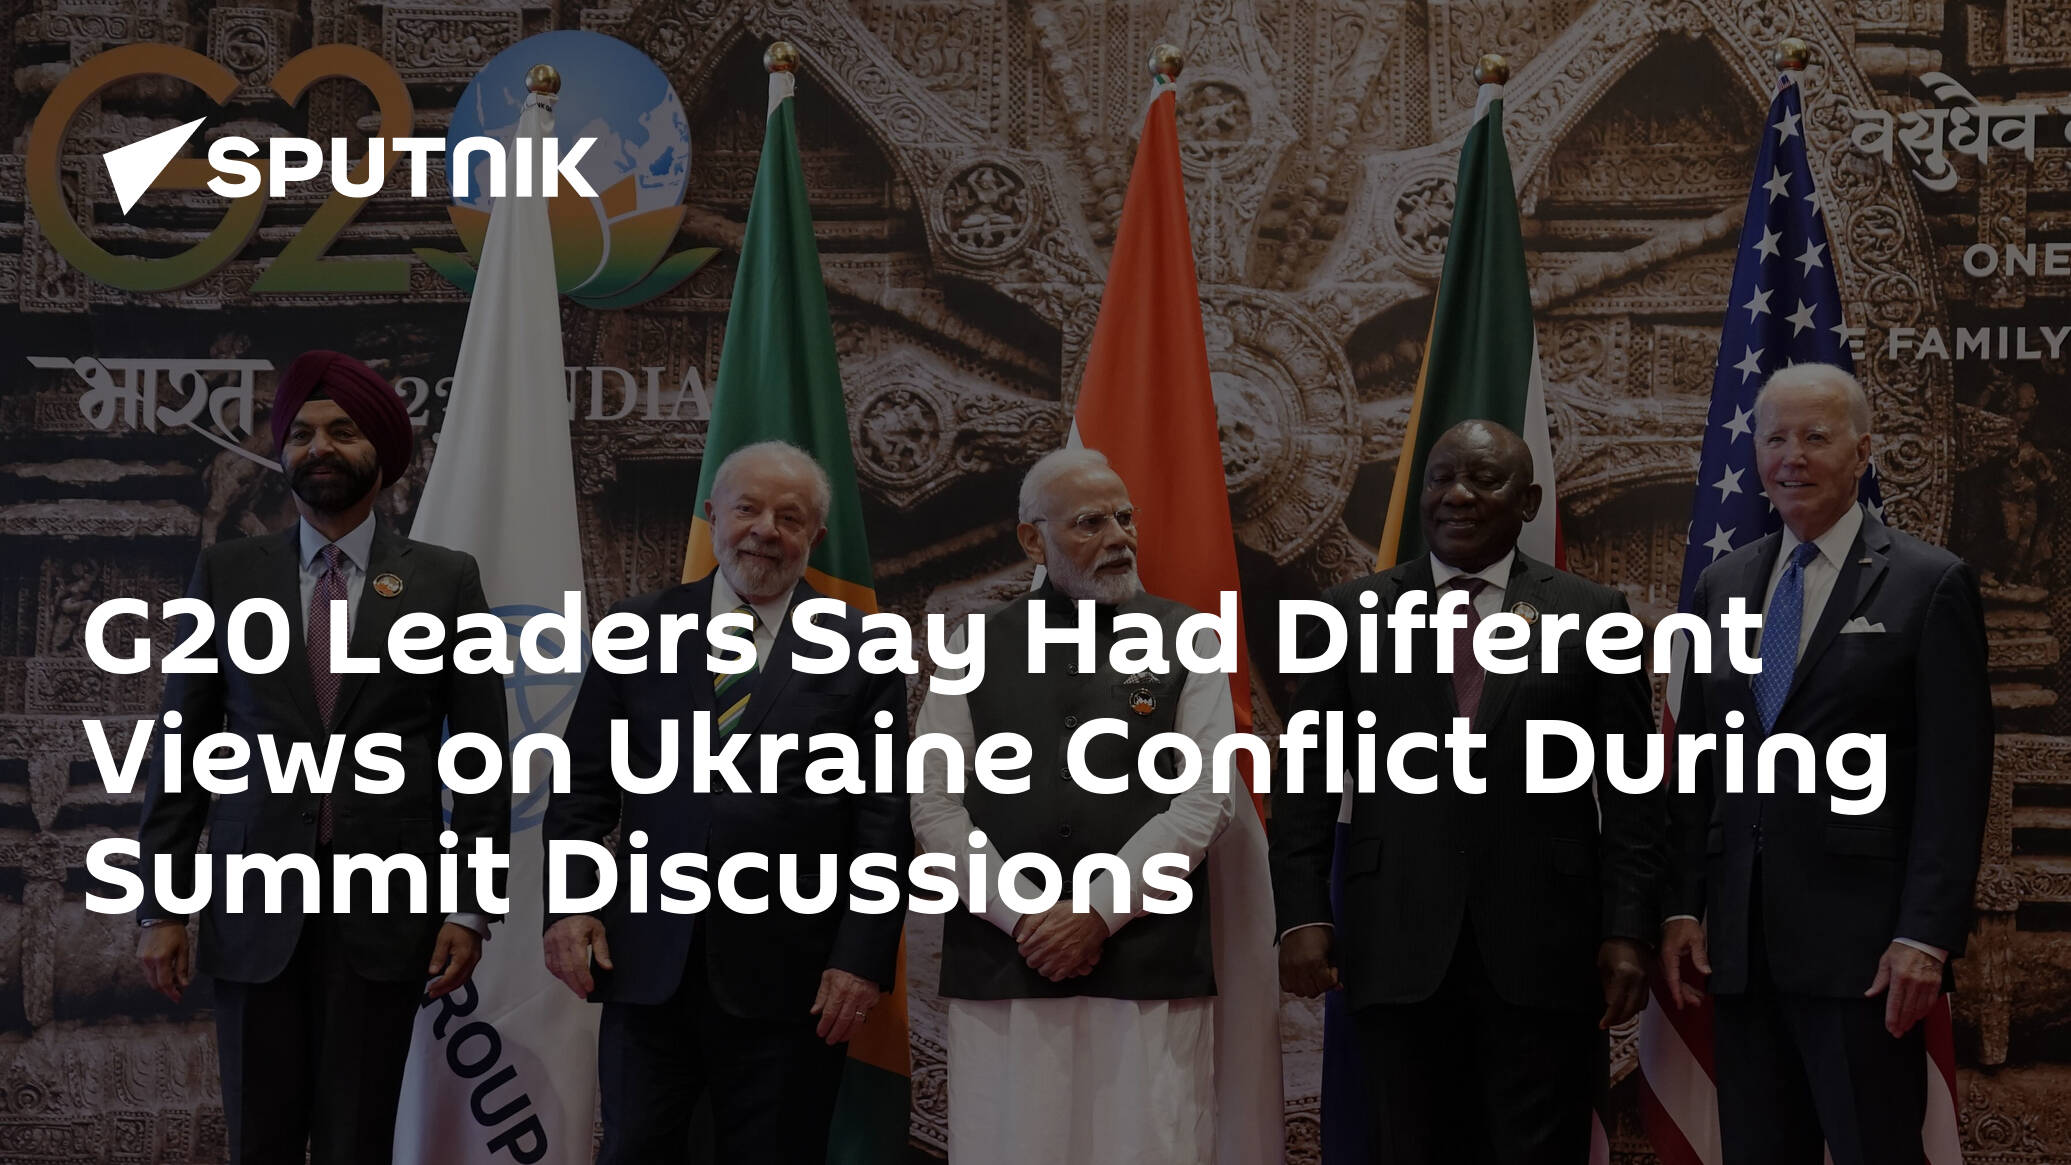 G20 Leaders Say Had Different Views on Ukraine Conflict During Summit Discussions